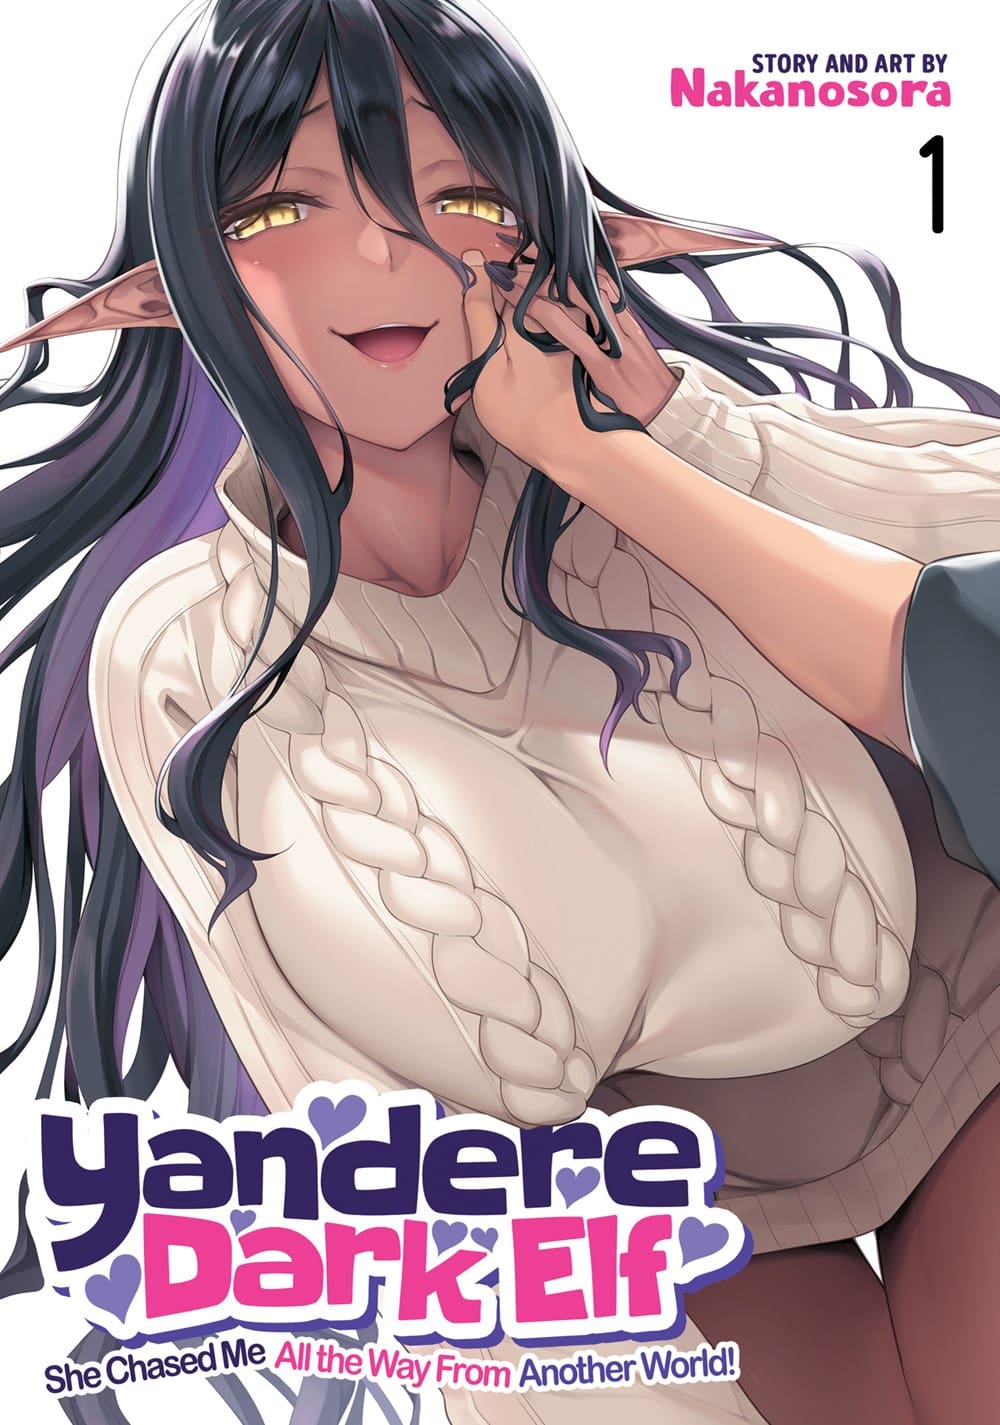 Yandere Dark Elf: She Chased Me All the Way From Another World!